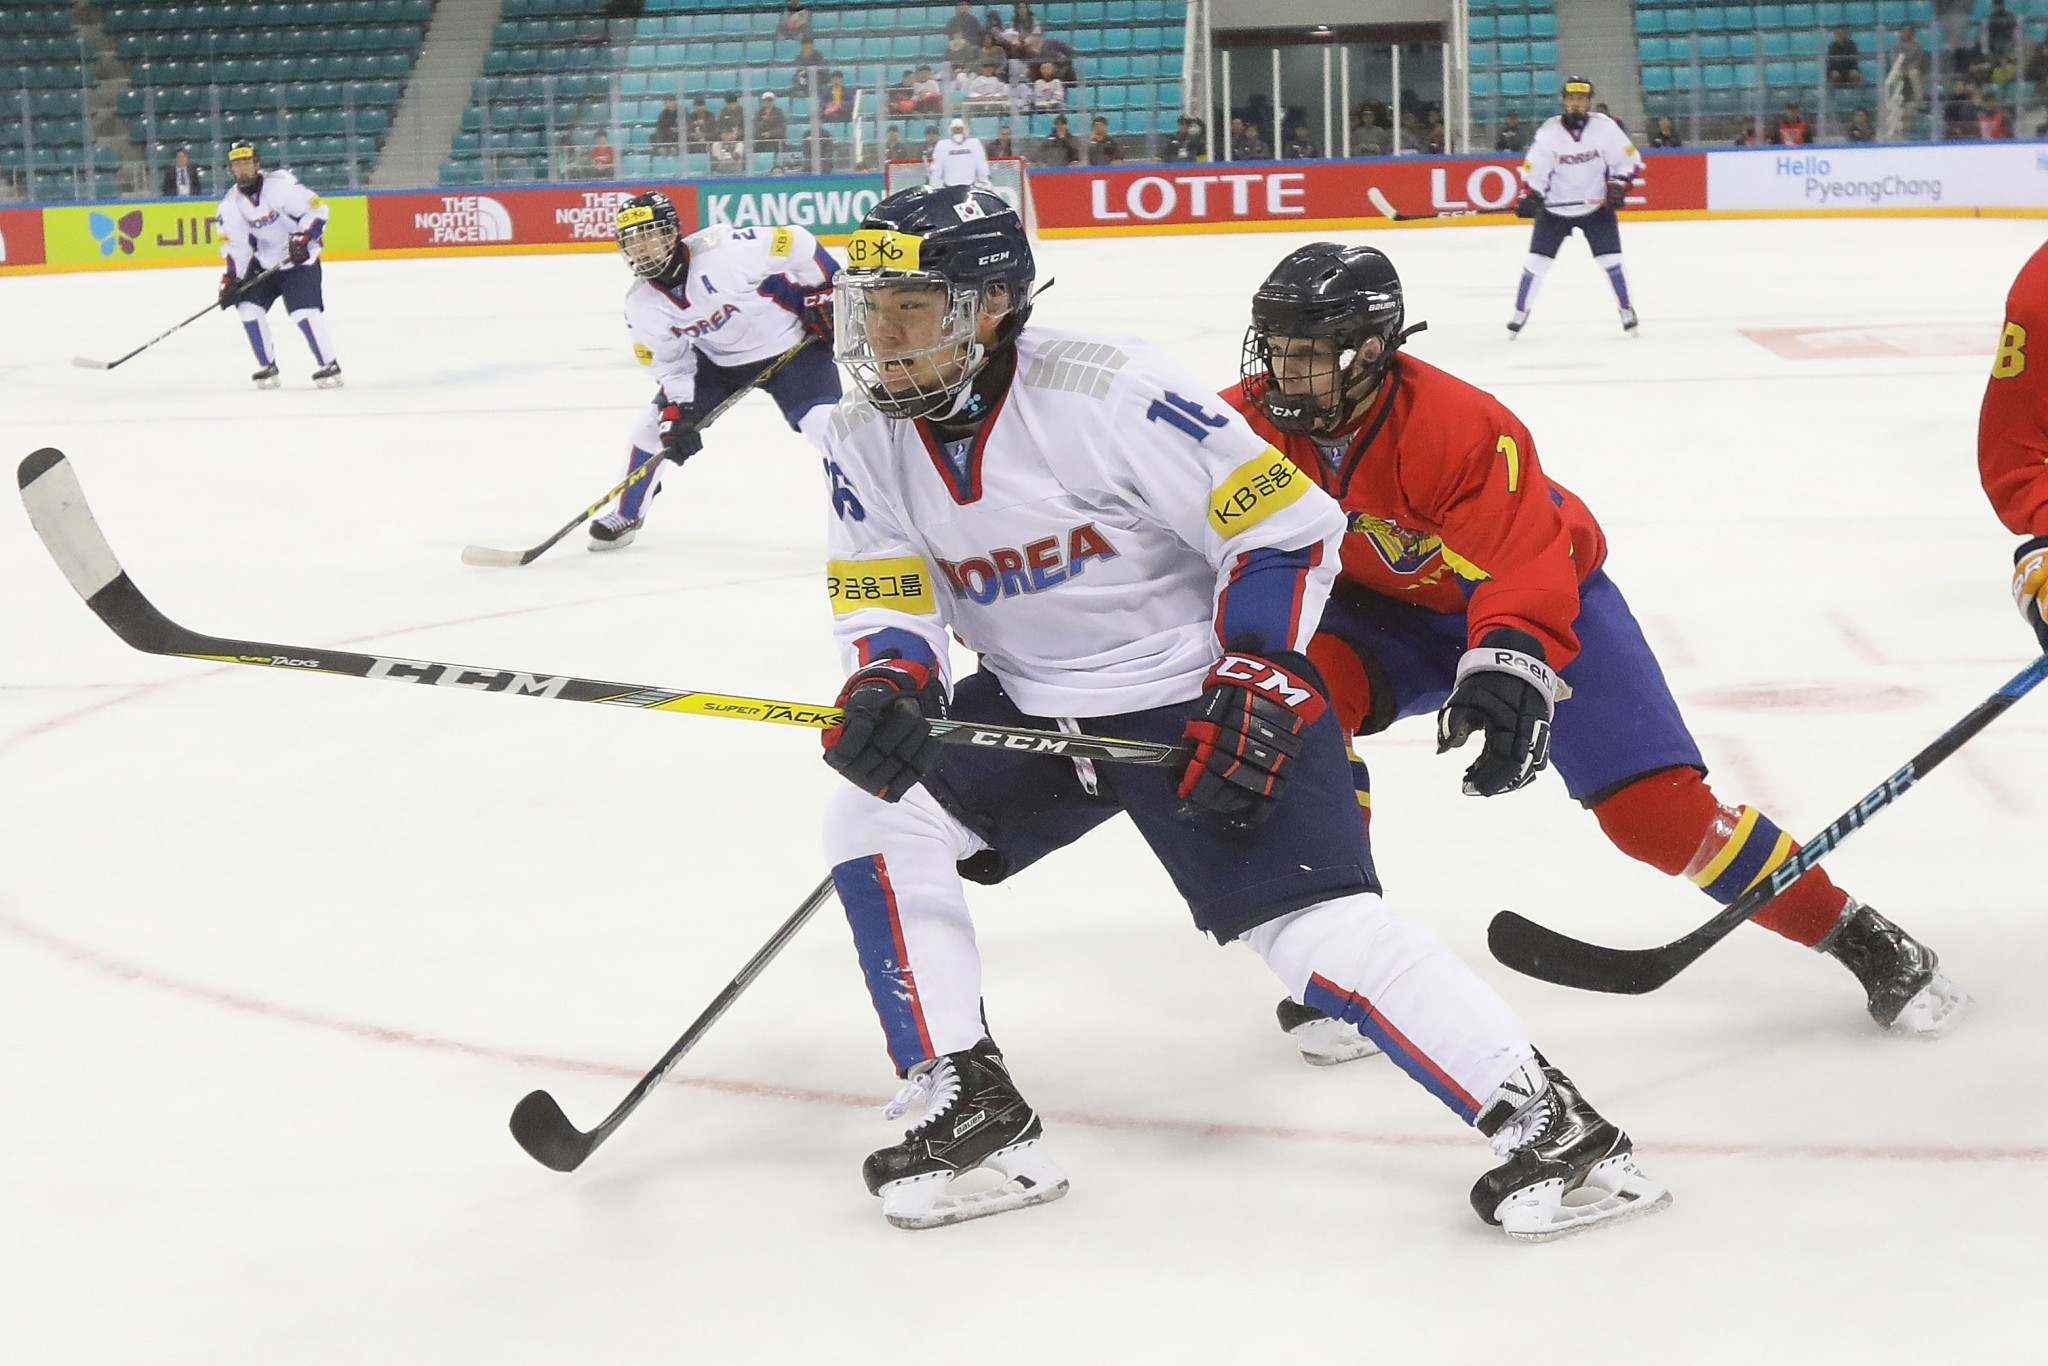 South Korea will make their debut in ice hockey competition at the Games, due to being hosts ©Getty Images